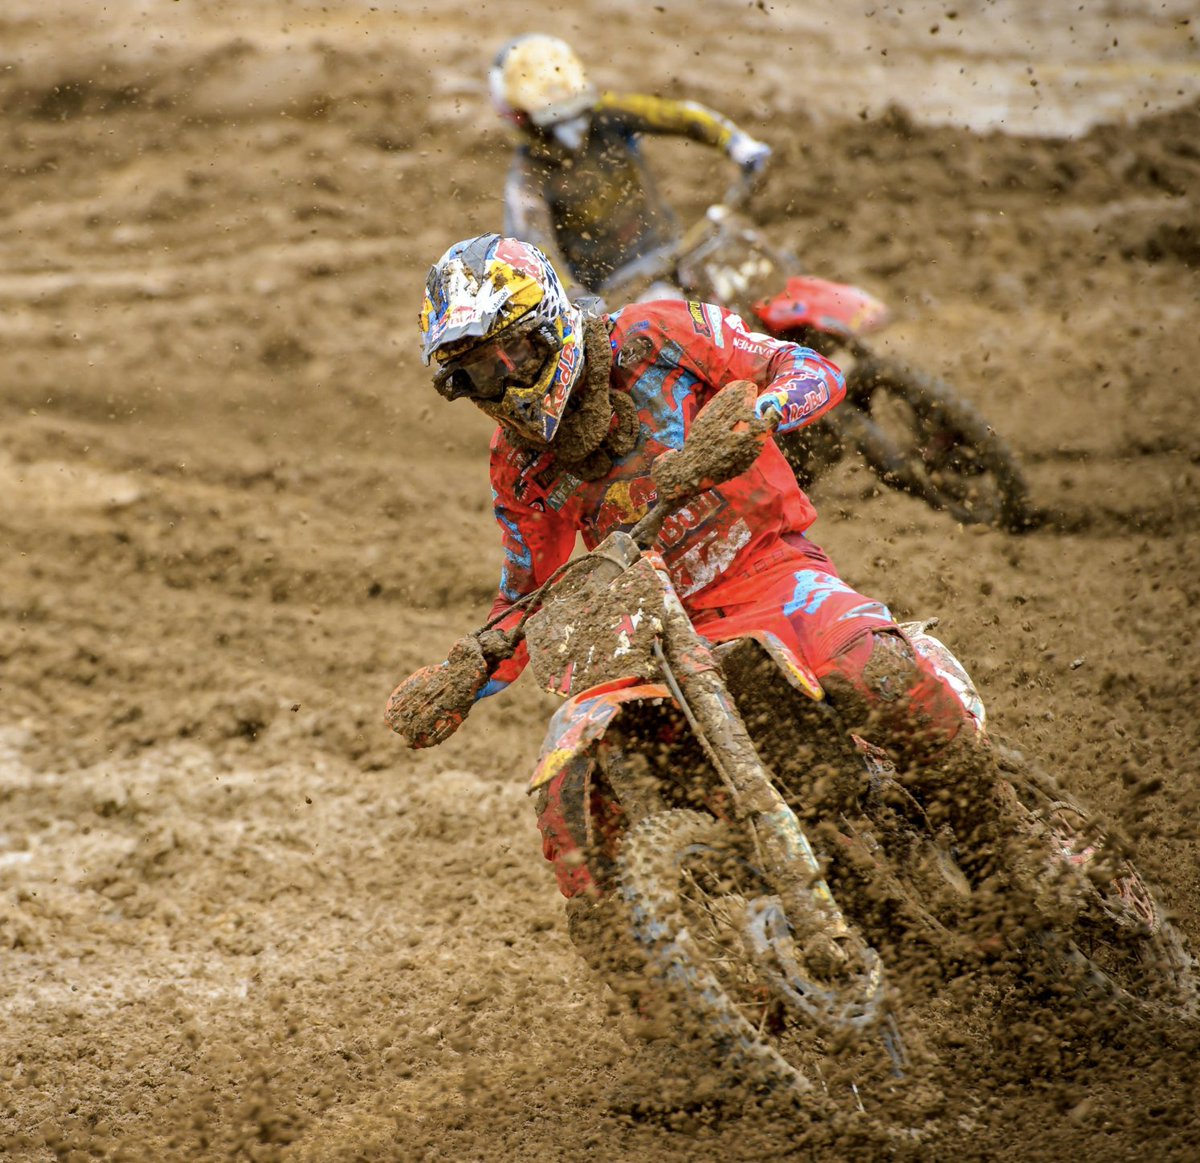 @ProMotocross @MarvinMusquin25 @BuddsCreekMX Fast forward 2 years, it's 2015: @MarvinMusquin25 conserves his goggles, finds a somewhat 'dry' line, and snags his third-straight overall victory in the 250s this season on the rain-soaked @BuddsCreekMX course.